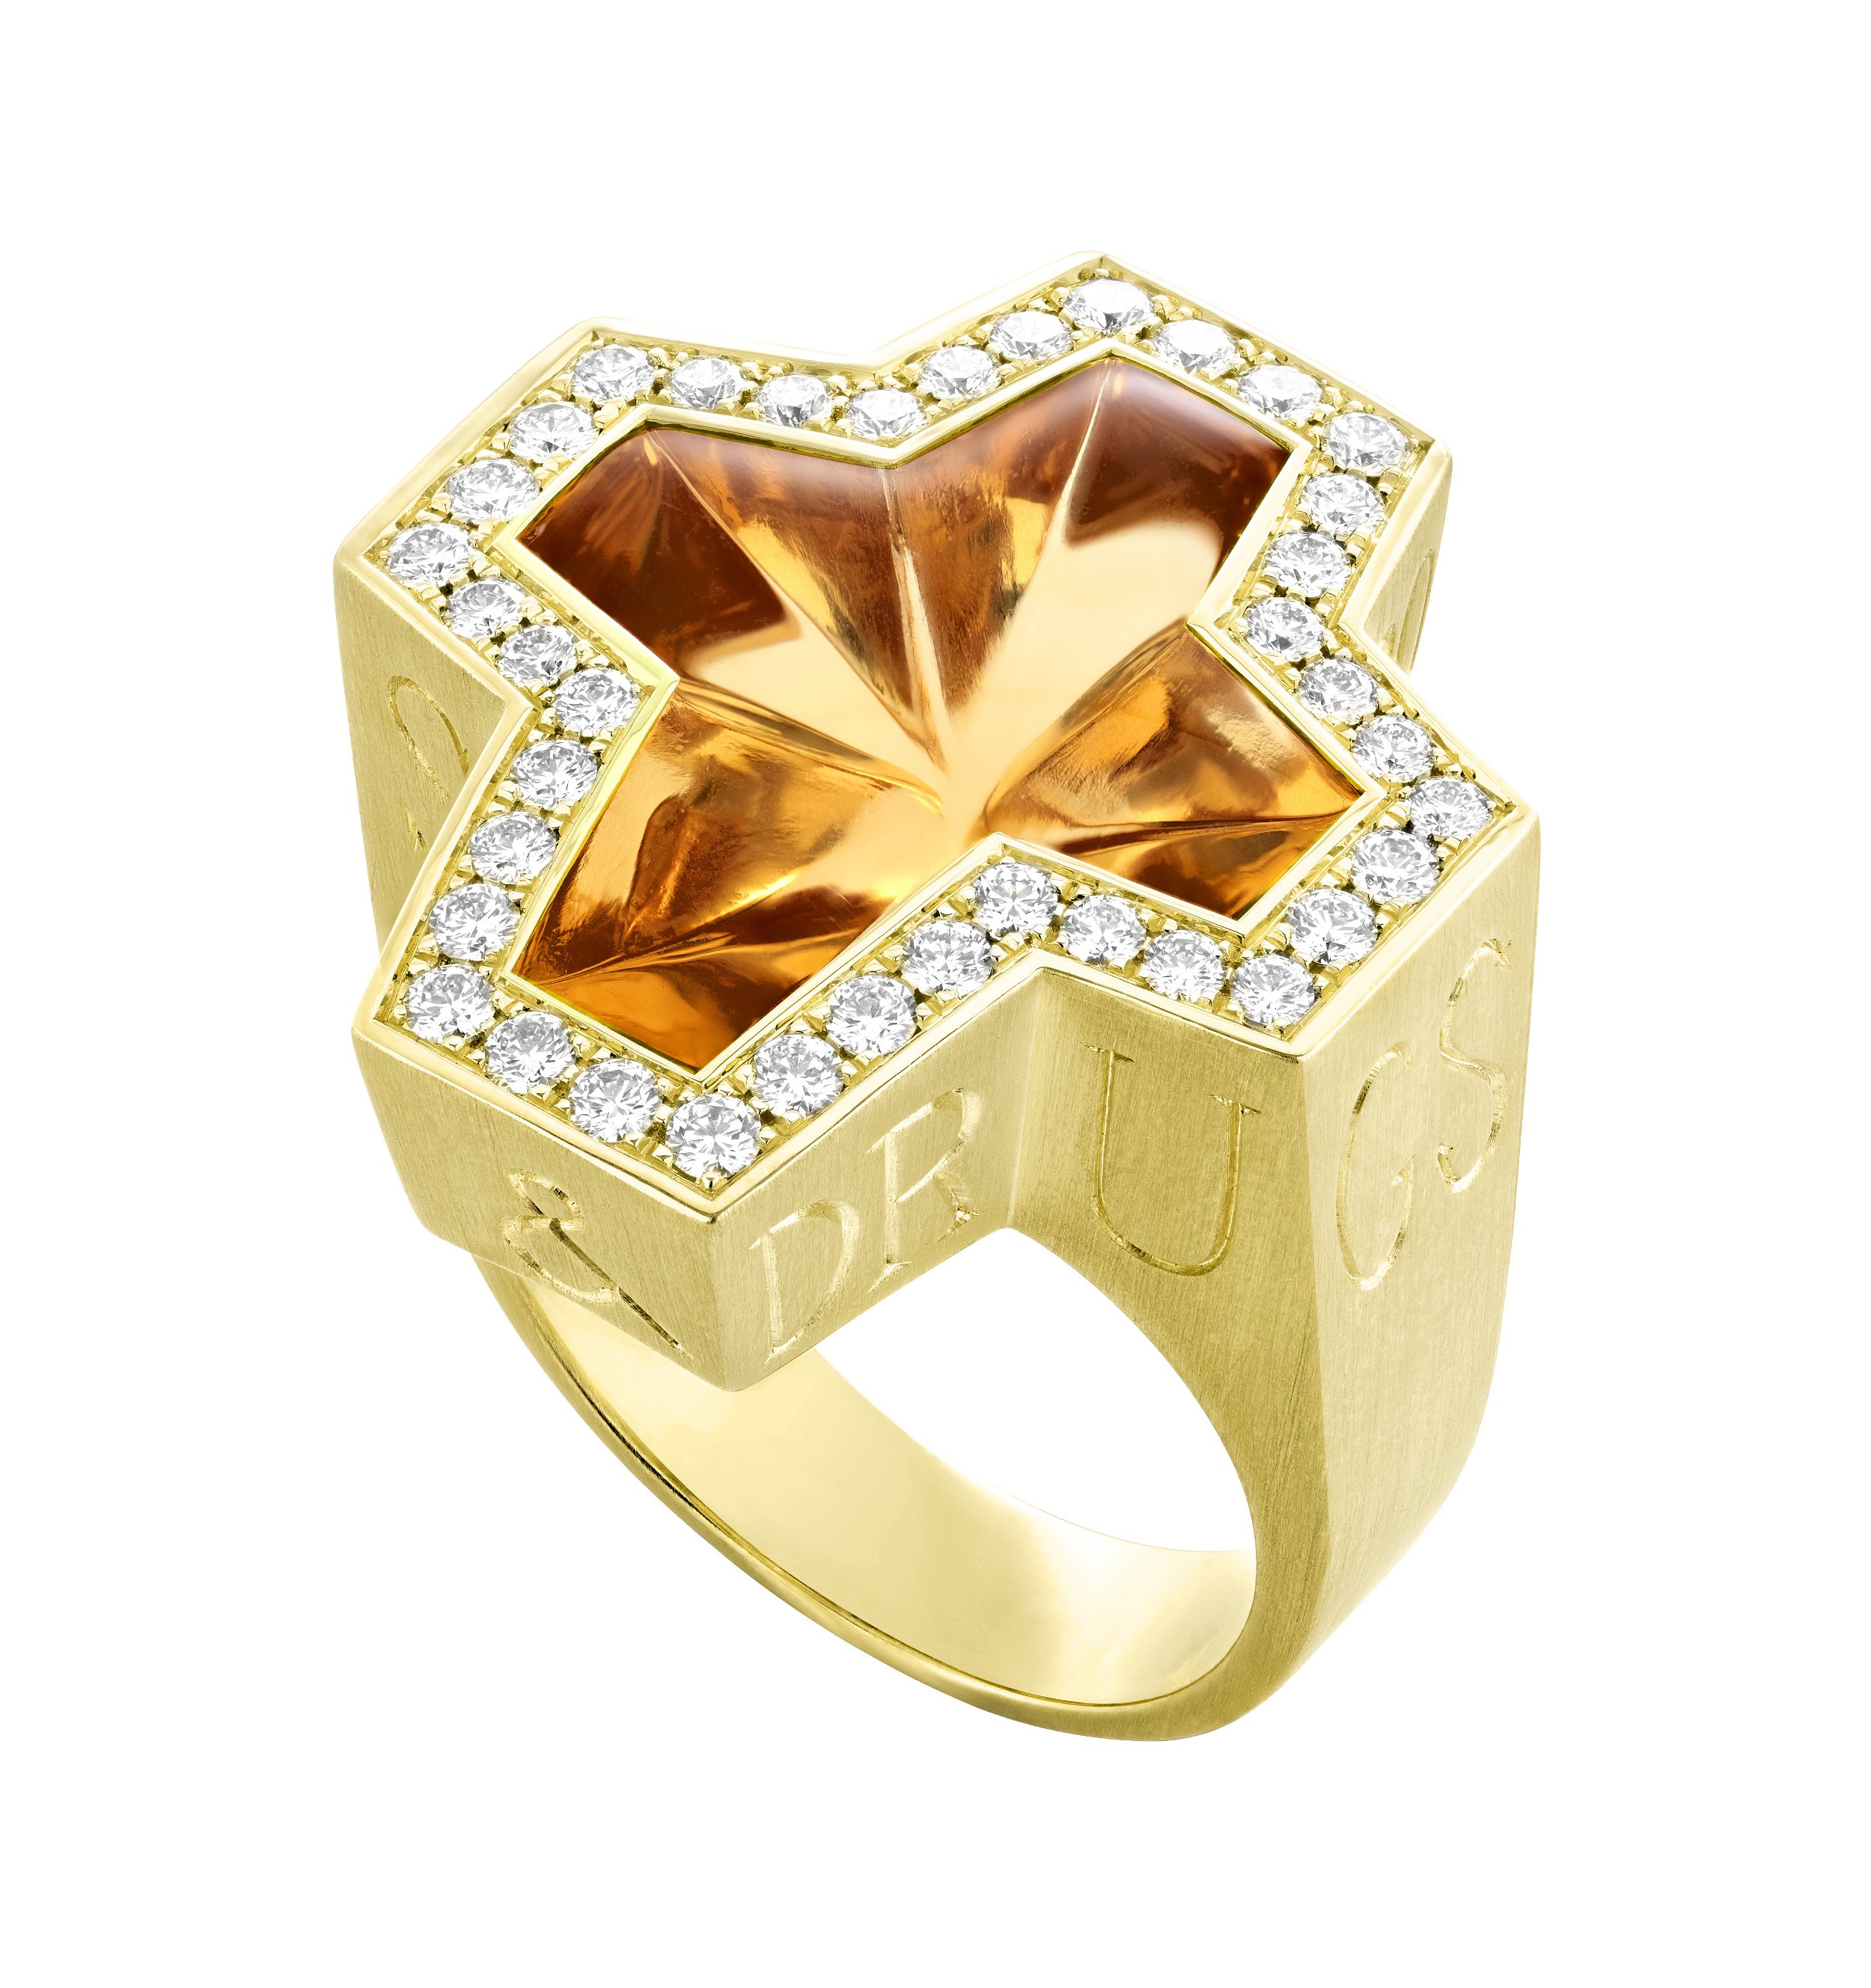 Thorn Sex Drugs & Rock "N" Roll Ring with Citrine and White Diamonds in 18kt Yellow Gold - Size 10